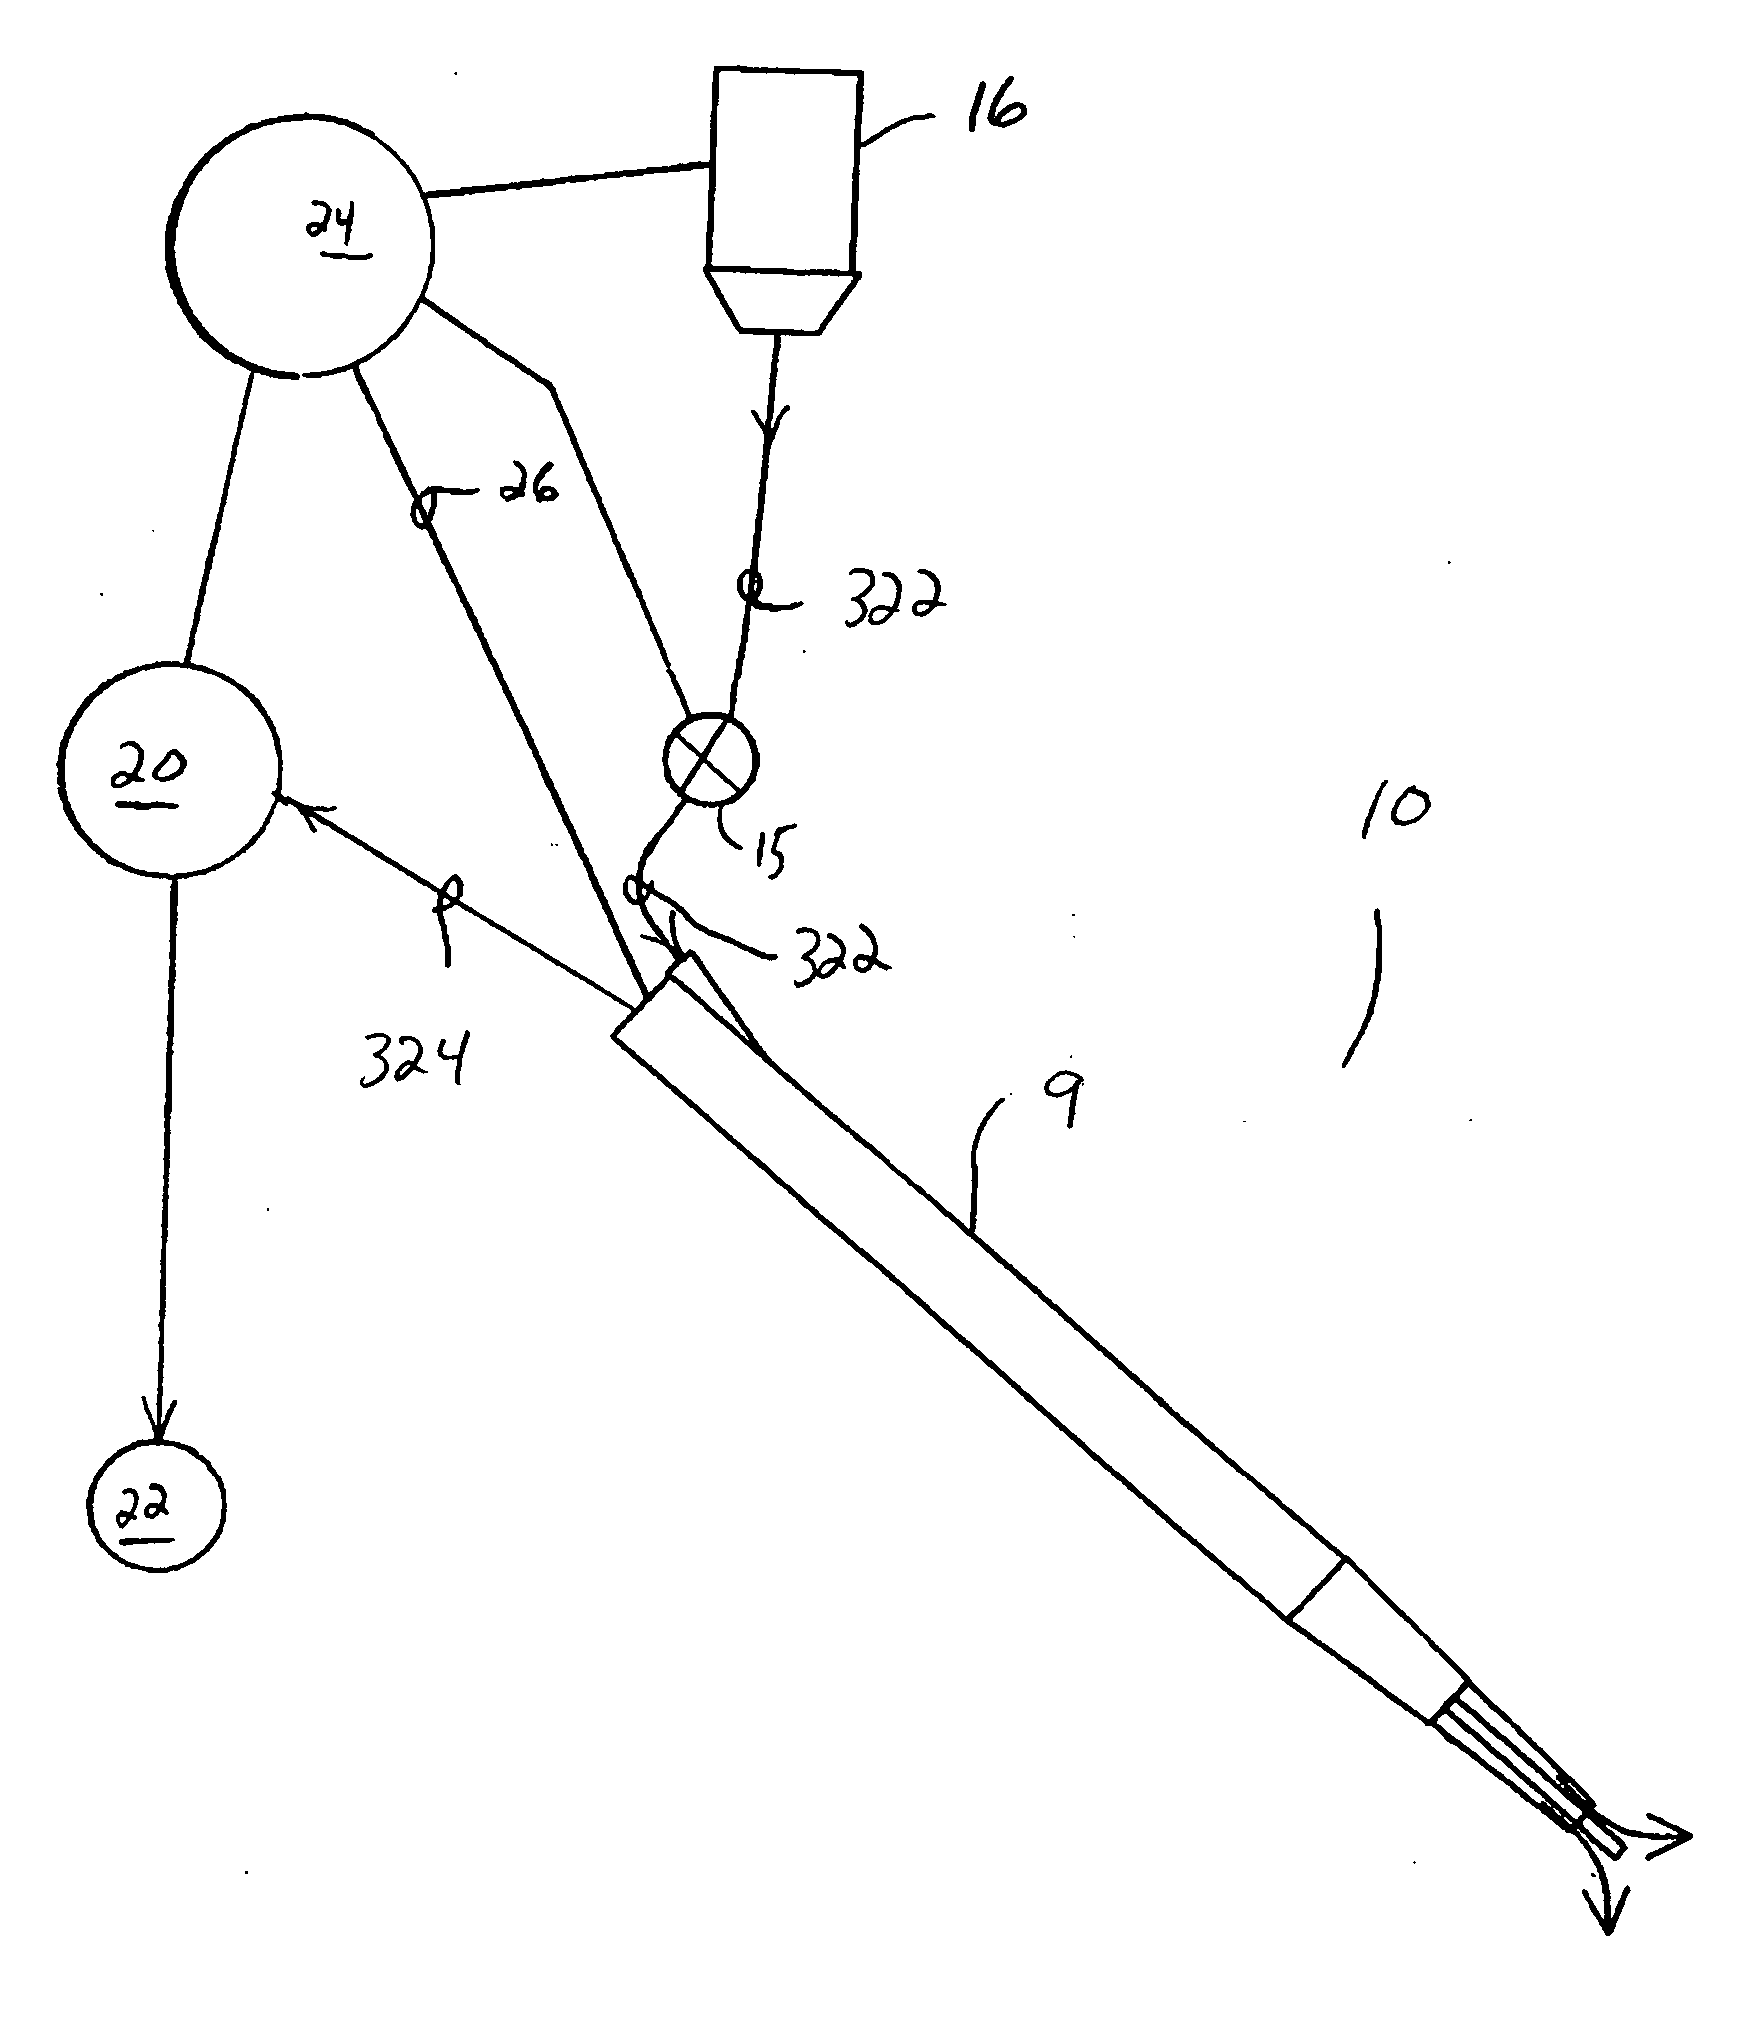 Low resistance irrigation system and apparatus